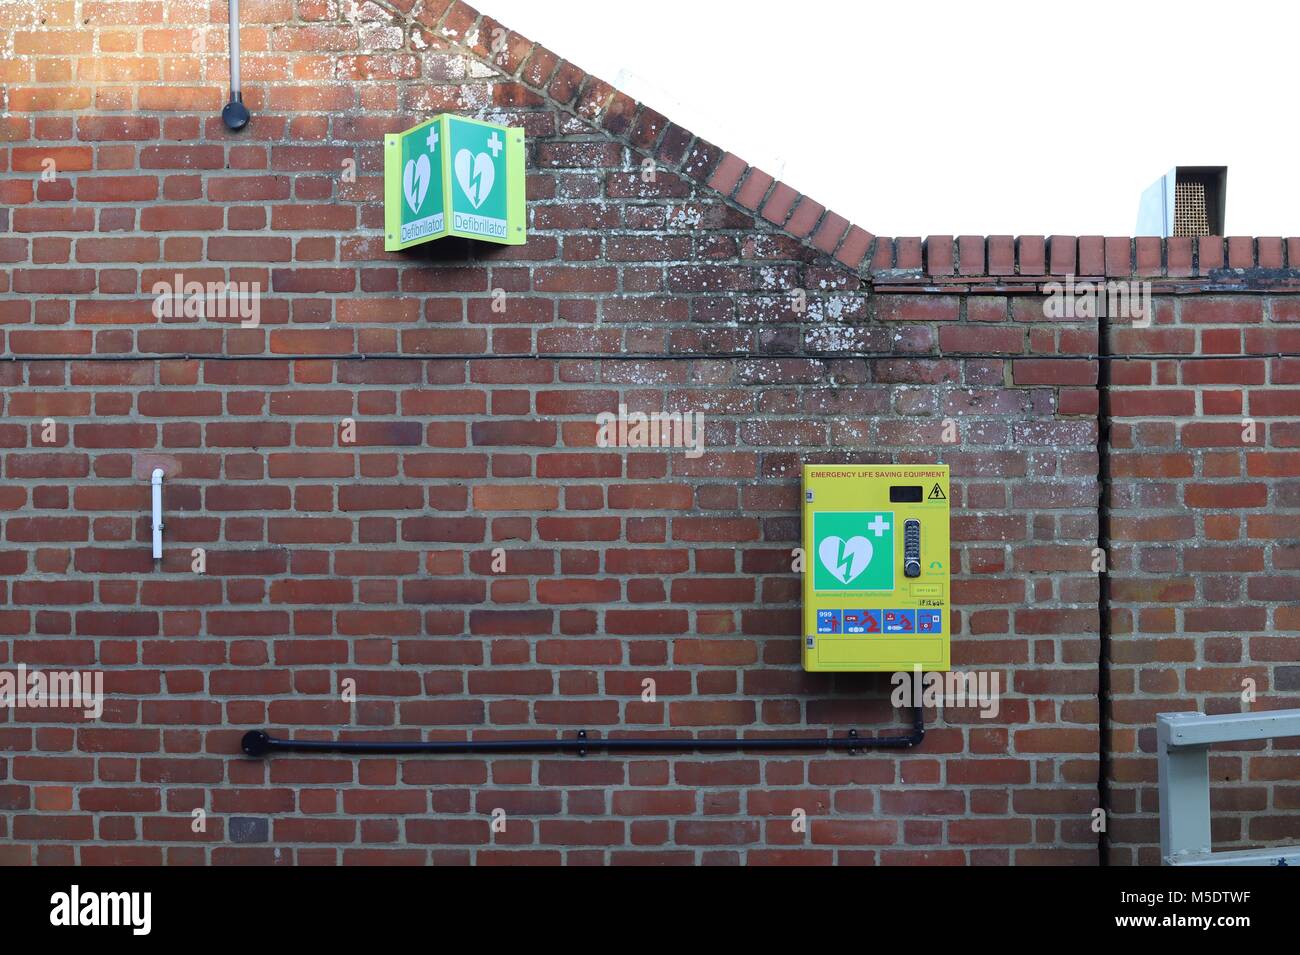 Defibrillator / emergency life saving equipment with code lock wall mounted for public use. Outside The Maybush pub in Waldringfield, Suffolk. Stock Photo